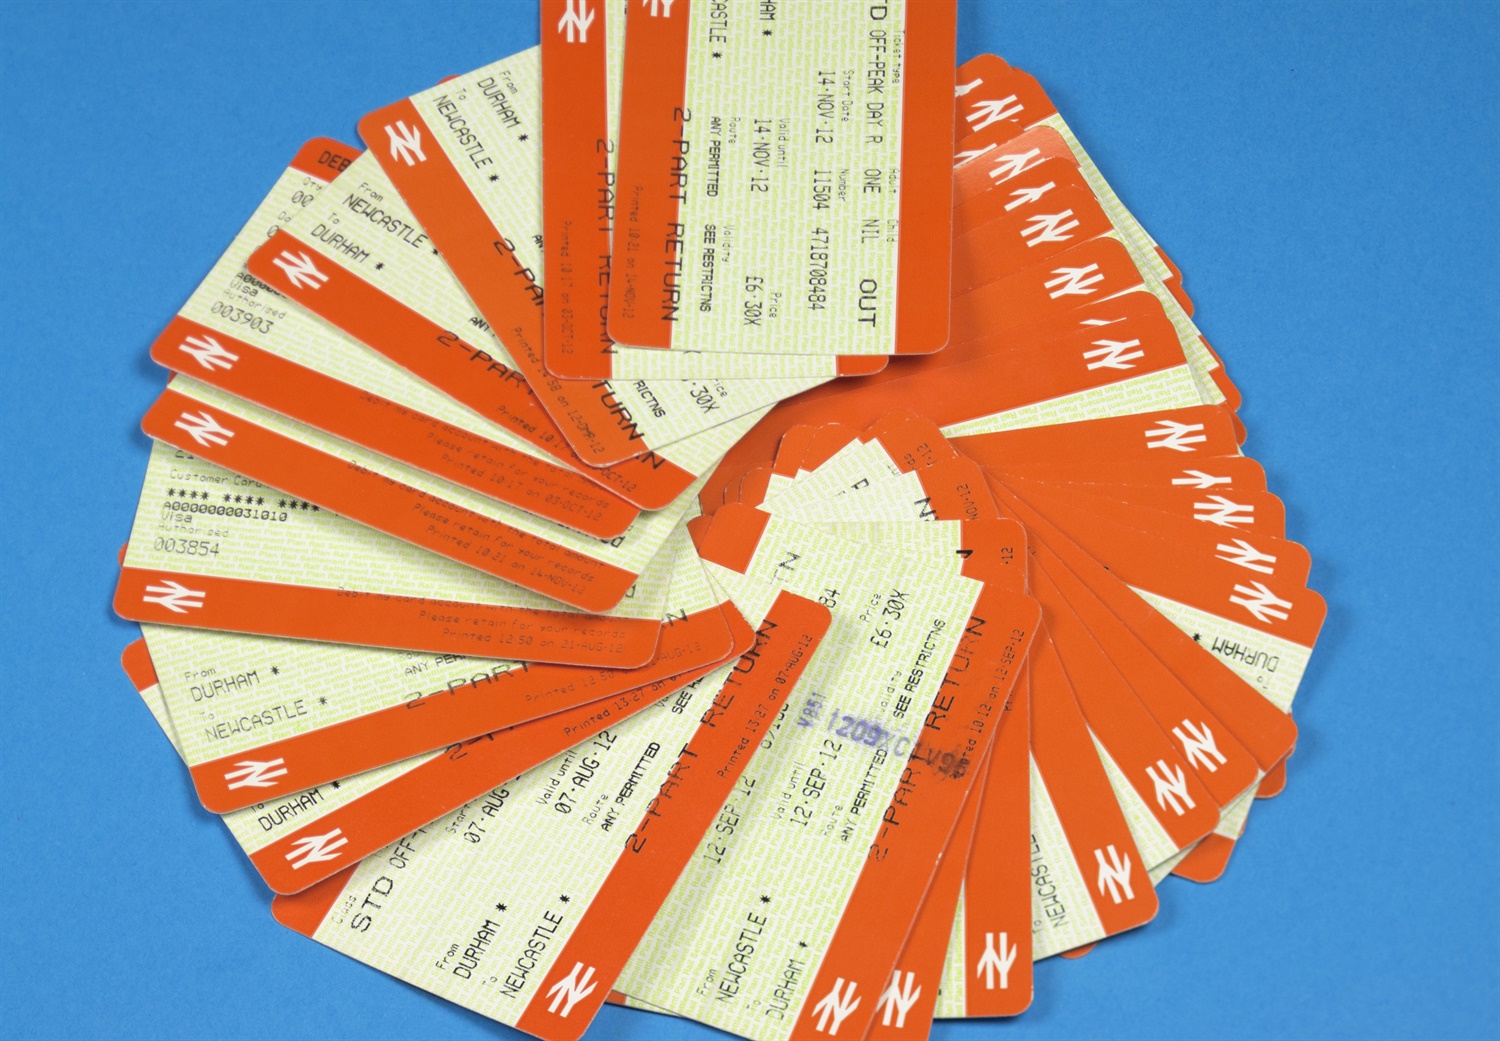 Rail industry to cut the jargon on confusing train tickets